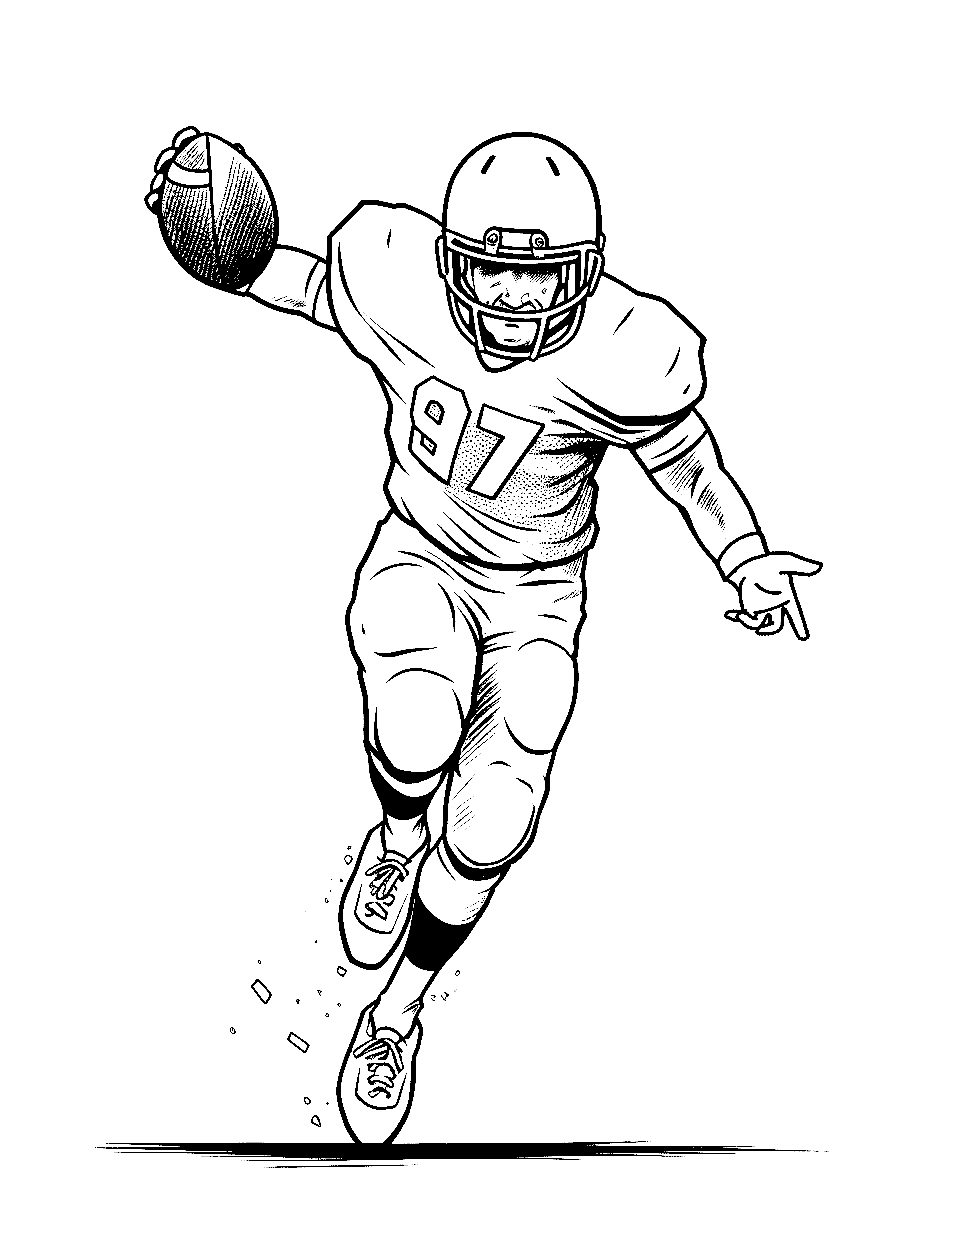 High Stepping into the End Zone Coloring Page - A player high-stepping into the end zone with a football.